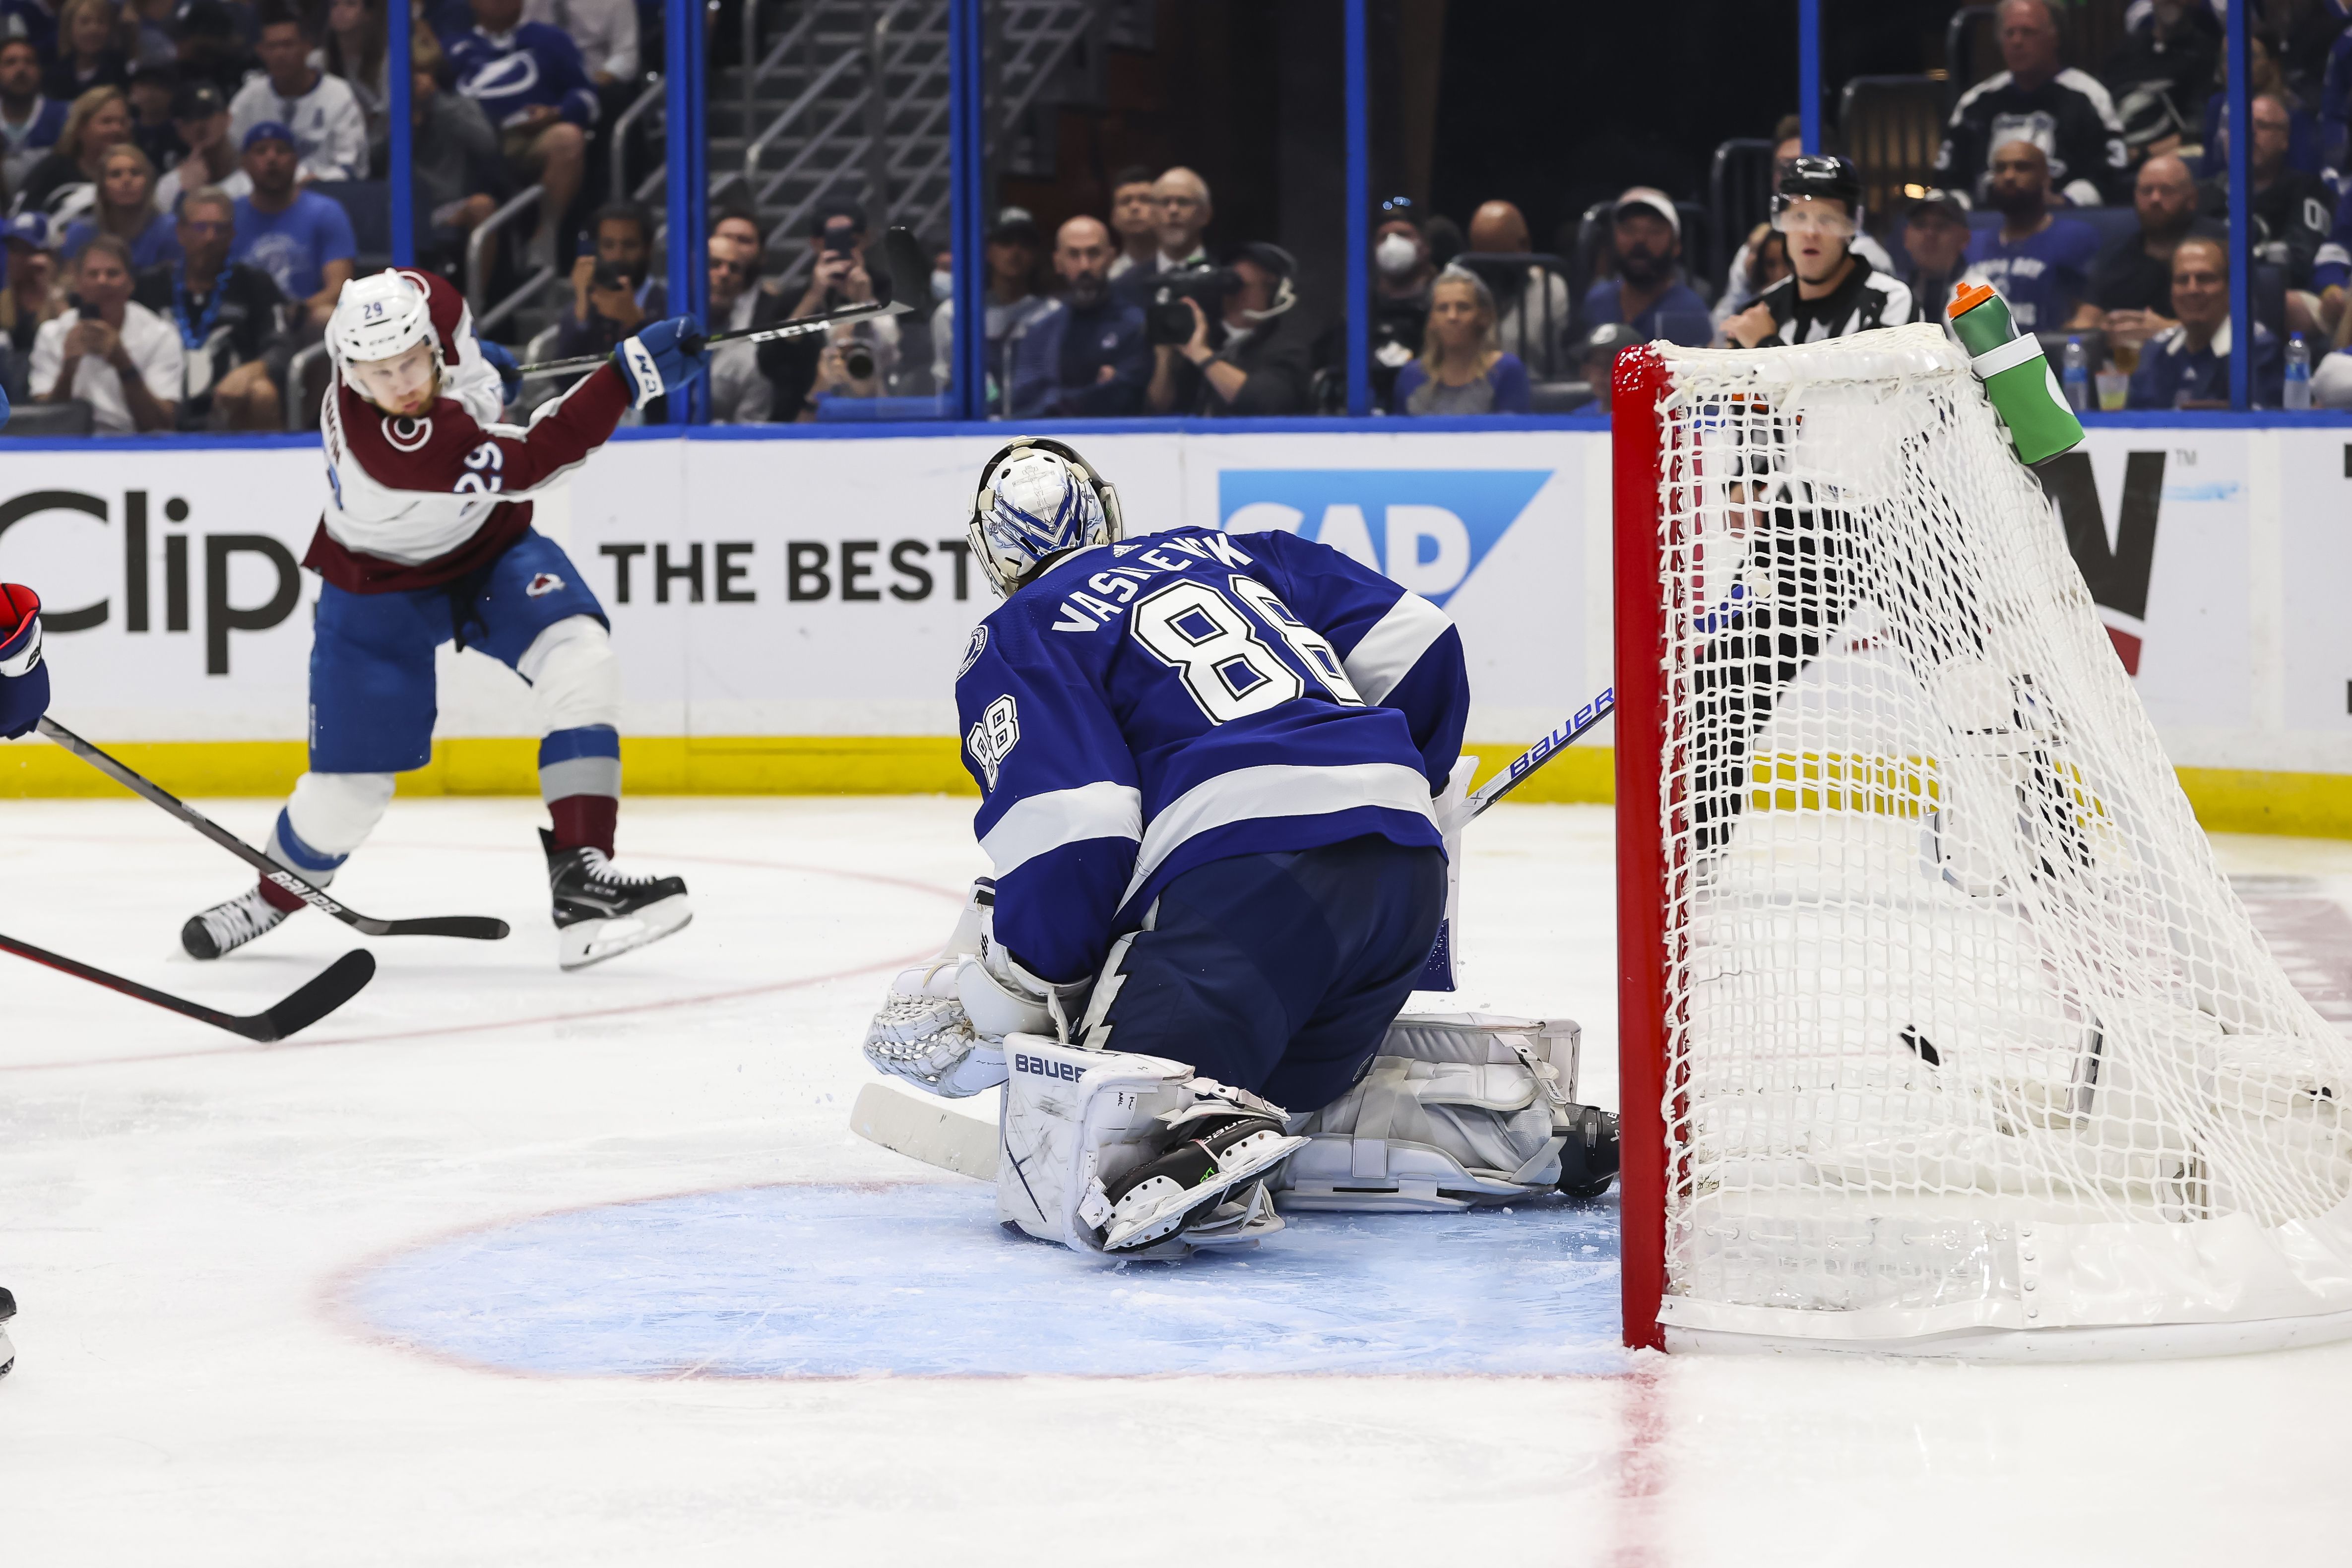 The Avalanche's Nathan MacKinnon fires a one-timer past Goalie Andrei Vasilevskiy in the second period to tie the game at 1-1. Photo: Mark LoMoglio/NHLI via Getty Images